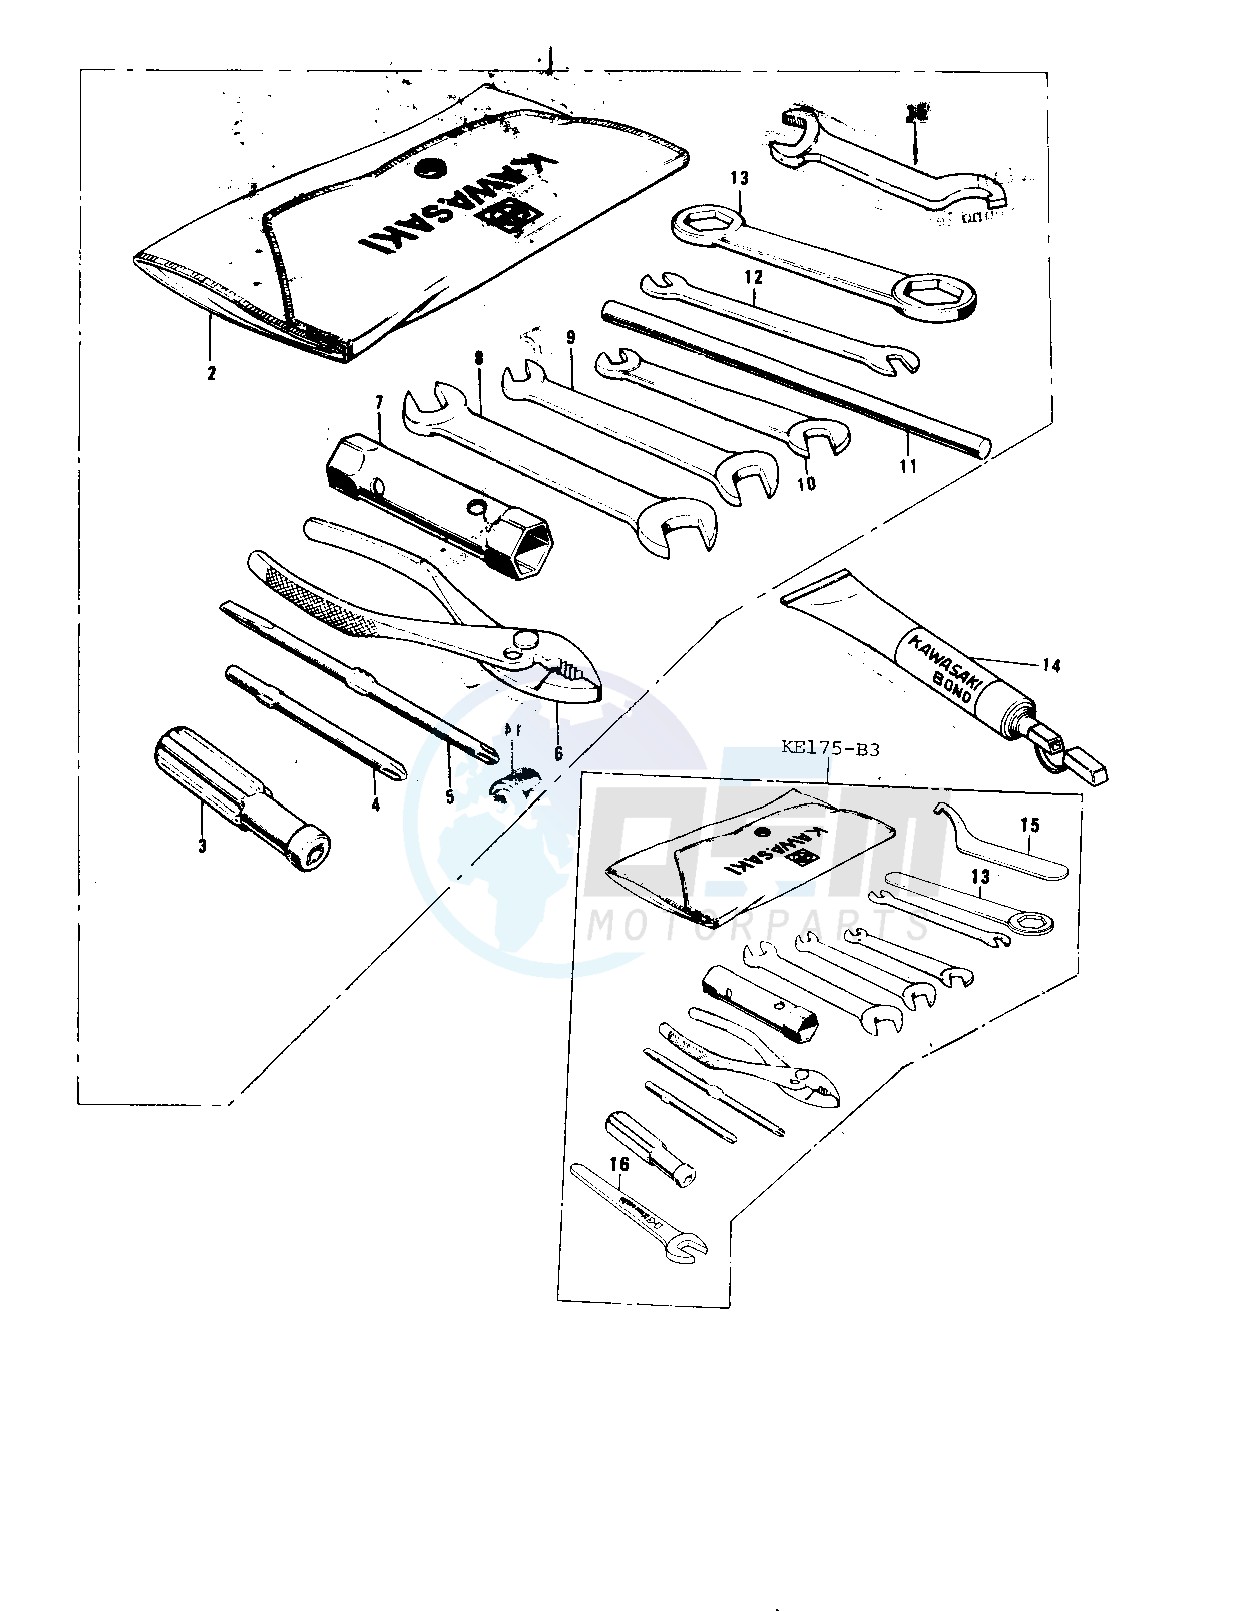 OWNER TOOLS image